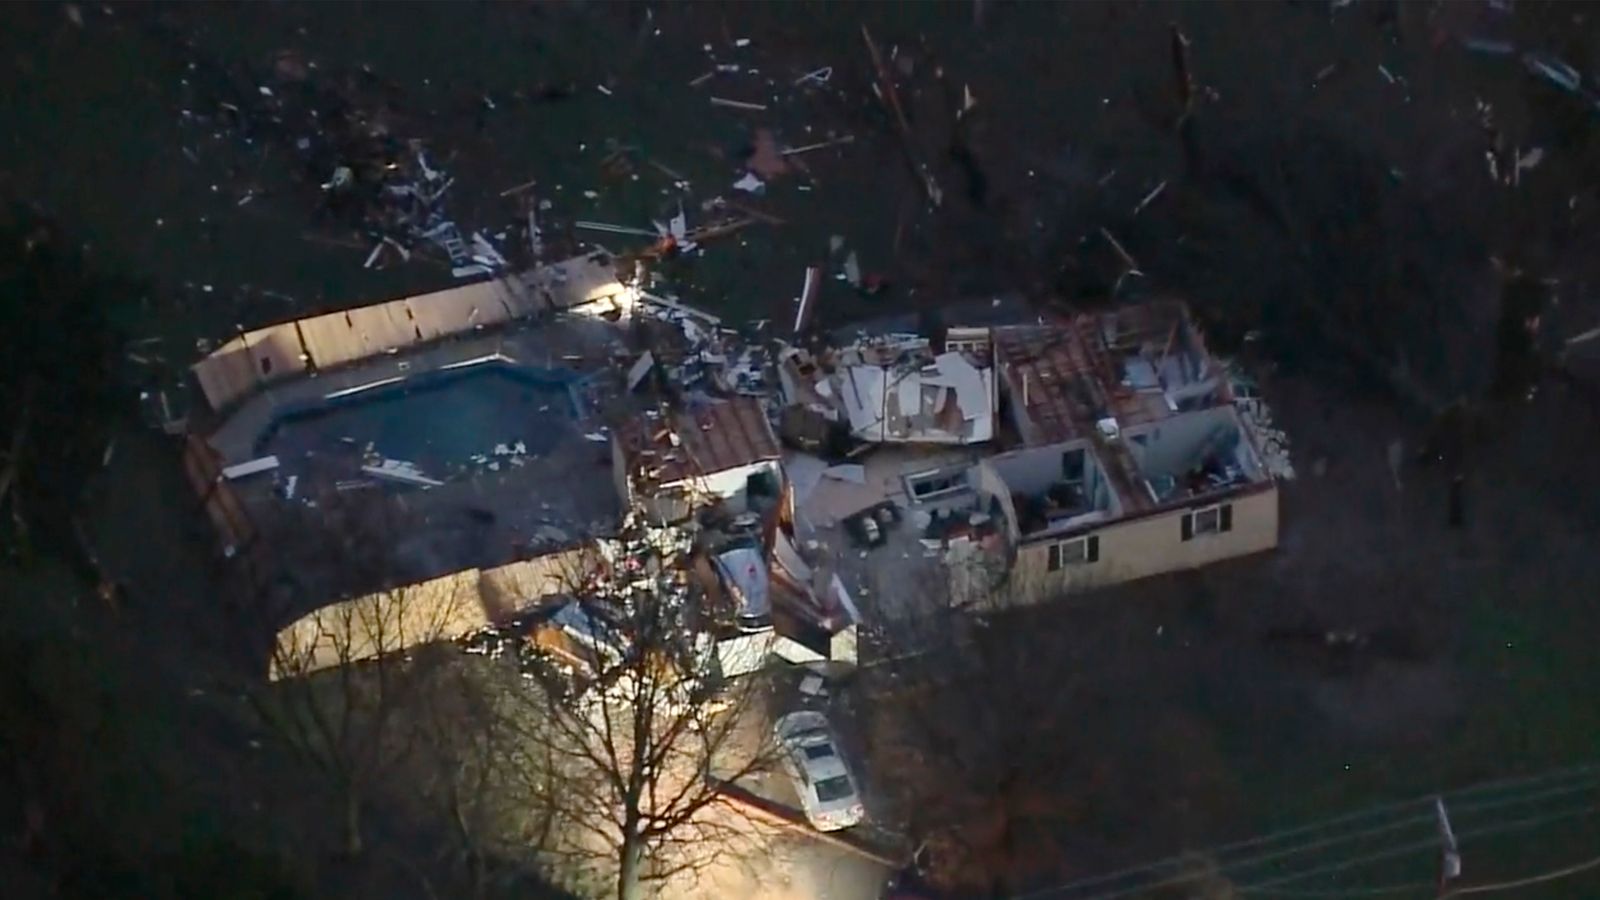 Severe storms bring tornadoes to Texas and US south and blizzards to Midwest